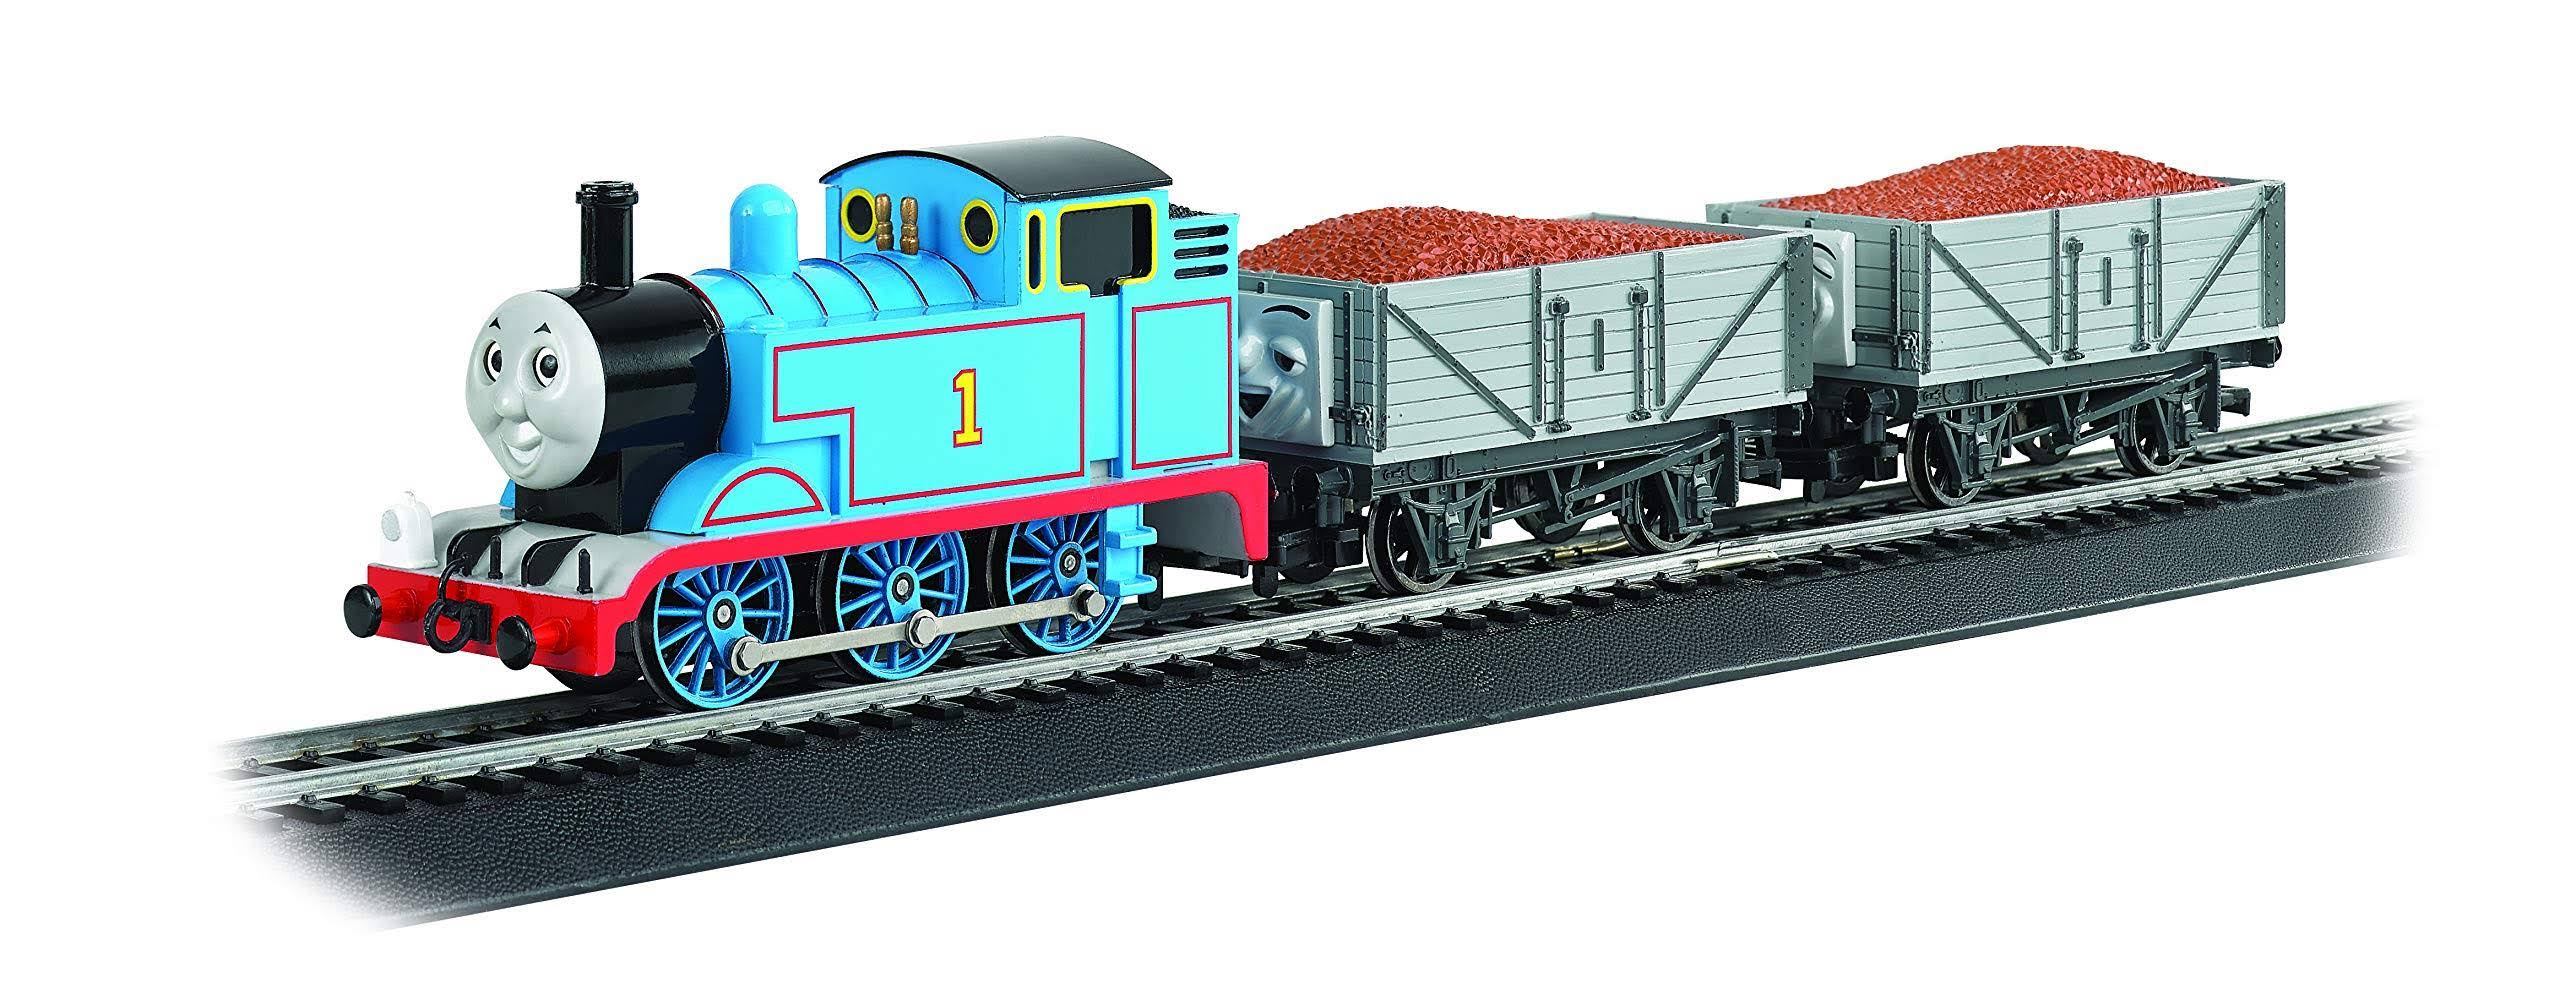 Bachmann Trains - Deluxe Thomas & The Troublesome Trucks Freight Set - Loco w/Moving Eyes - Ho Scale